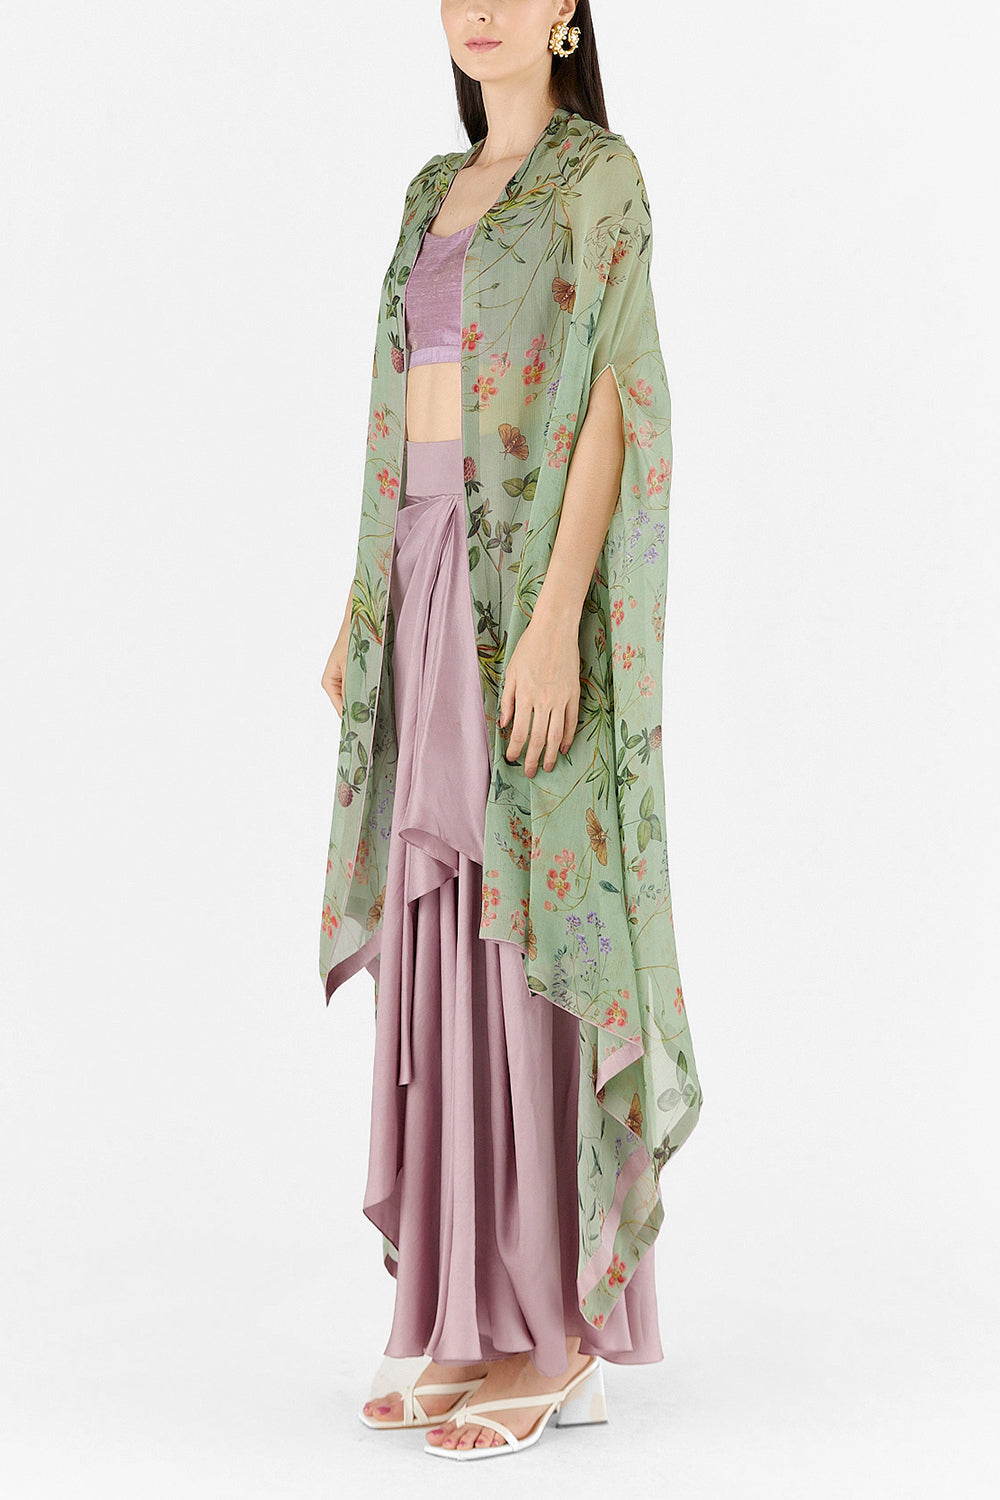 Green Floral Printed Cape Set